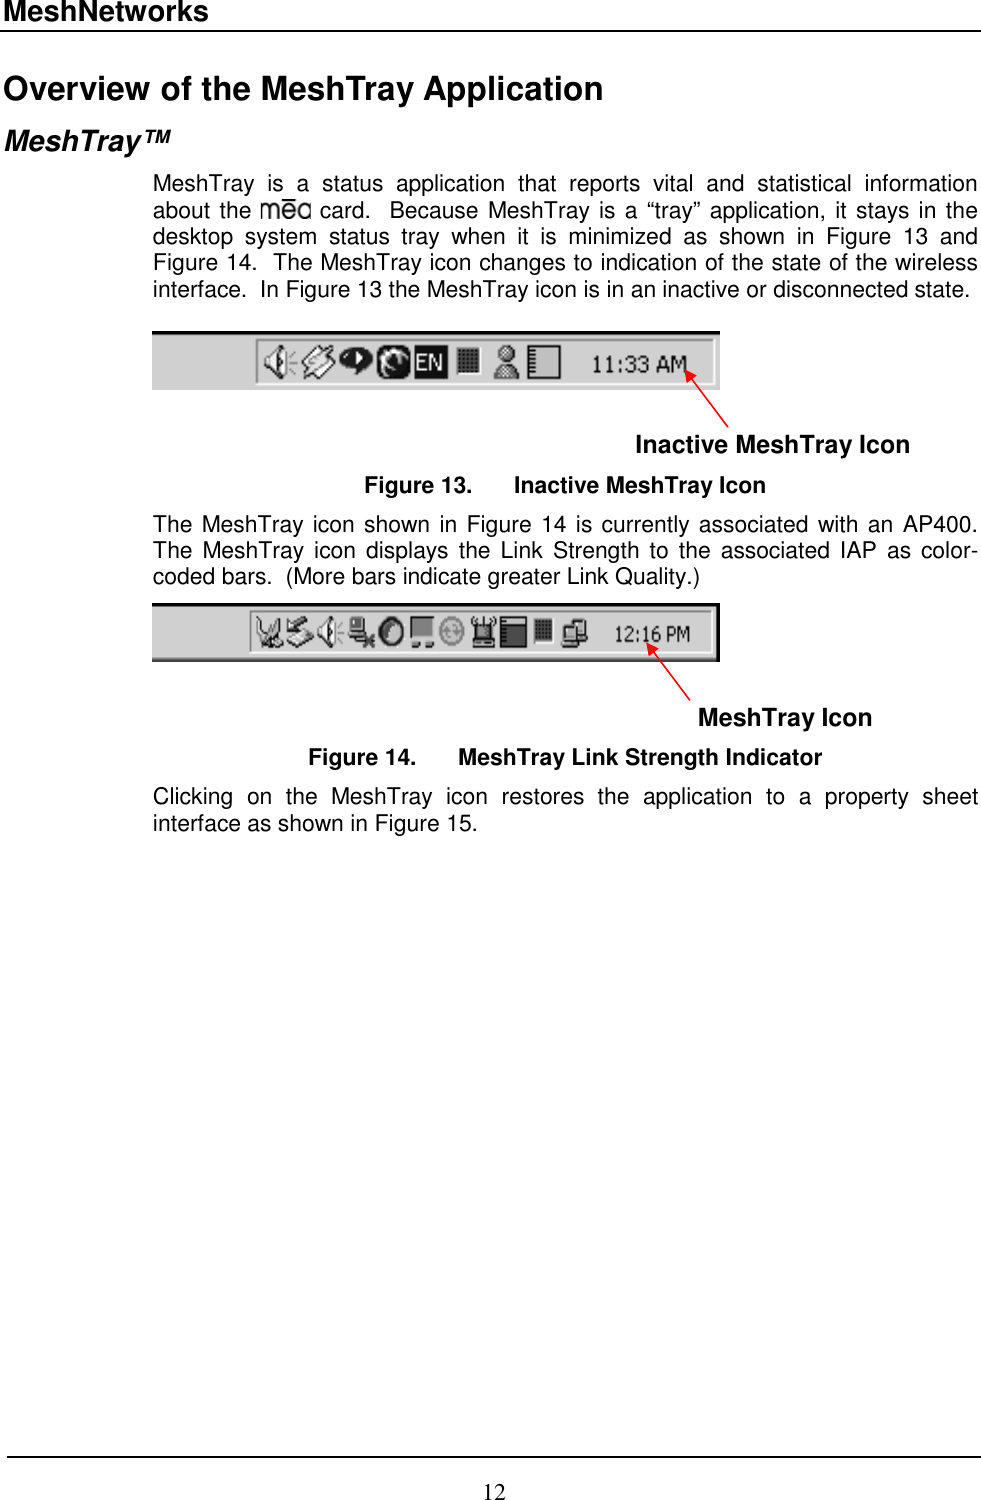 MeshNetworks 12 Overview of the MeshTray Application MeshTray™ MeshTray is a status application that reports vital and statistical information about the   card.  Because MeshTray is a “tray” application, it stays in the desktop system status tray when it is minimized as shown in Figure 13 and Figure 14.  The MeshTray icon changes to indication of the state of the wireless interface.  In Figure 13 the MeshTray icon is in an inactive or disconnected state.                                                                                                       Inactive MeshTray Icon Figure 13.  Inactive MeshTray Icon The MeshTray icon shown in Figure 14 is currently associated with an AP400.  The MeshTray icon displays the Link Strength to the associated IAP as color-coded bars.  (More bars indicate greater Link Quality.)                                                                                                                 MeshTray Icon Figure 14.  MeshTray Link Strength Indicator Clicking on the MeshTray icon restores the application to a property sheet interface as shown in Figure 15.   